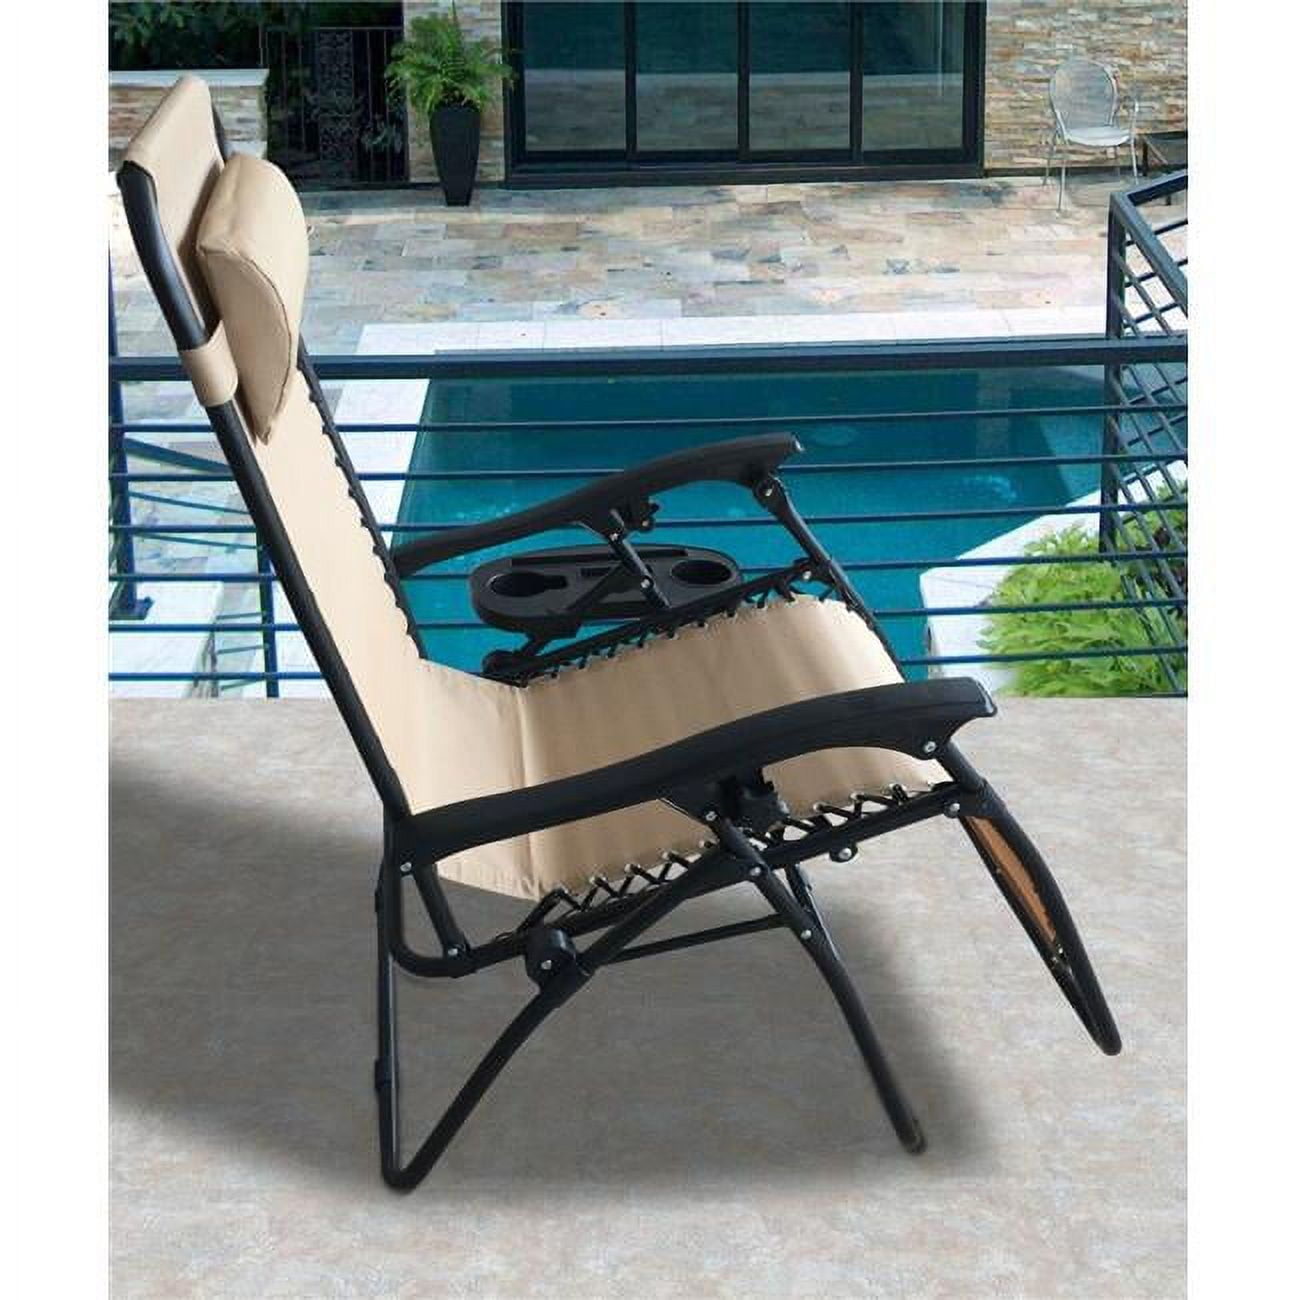 V64001a228 21.75 X 23.75 X 28 In. Zero Gravity Recliner & Lounger With Cup Holder, Cream Mesh Fabric - Pack Of 2